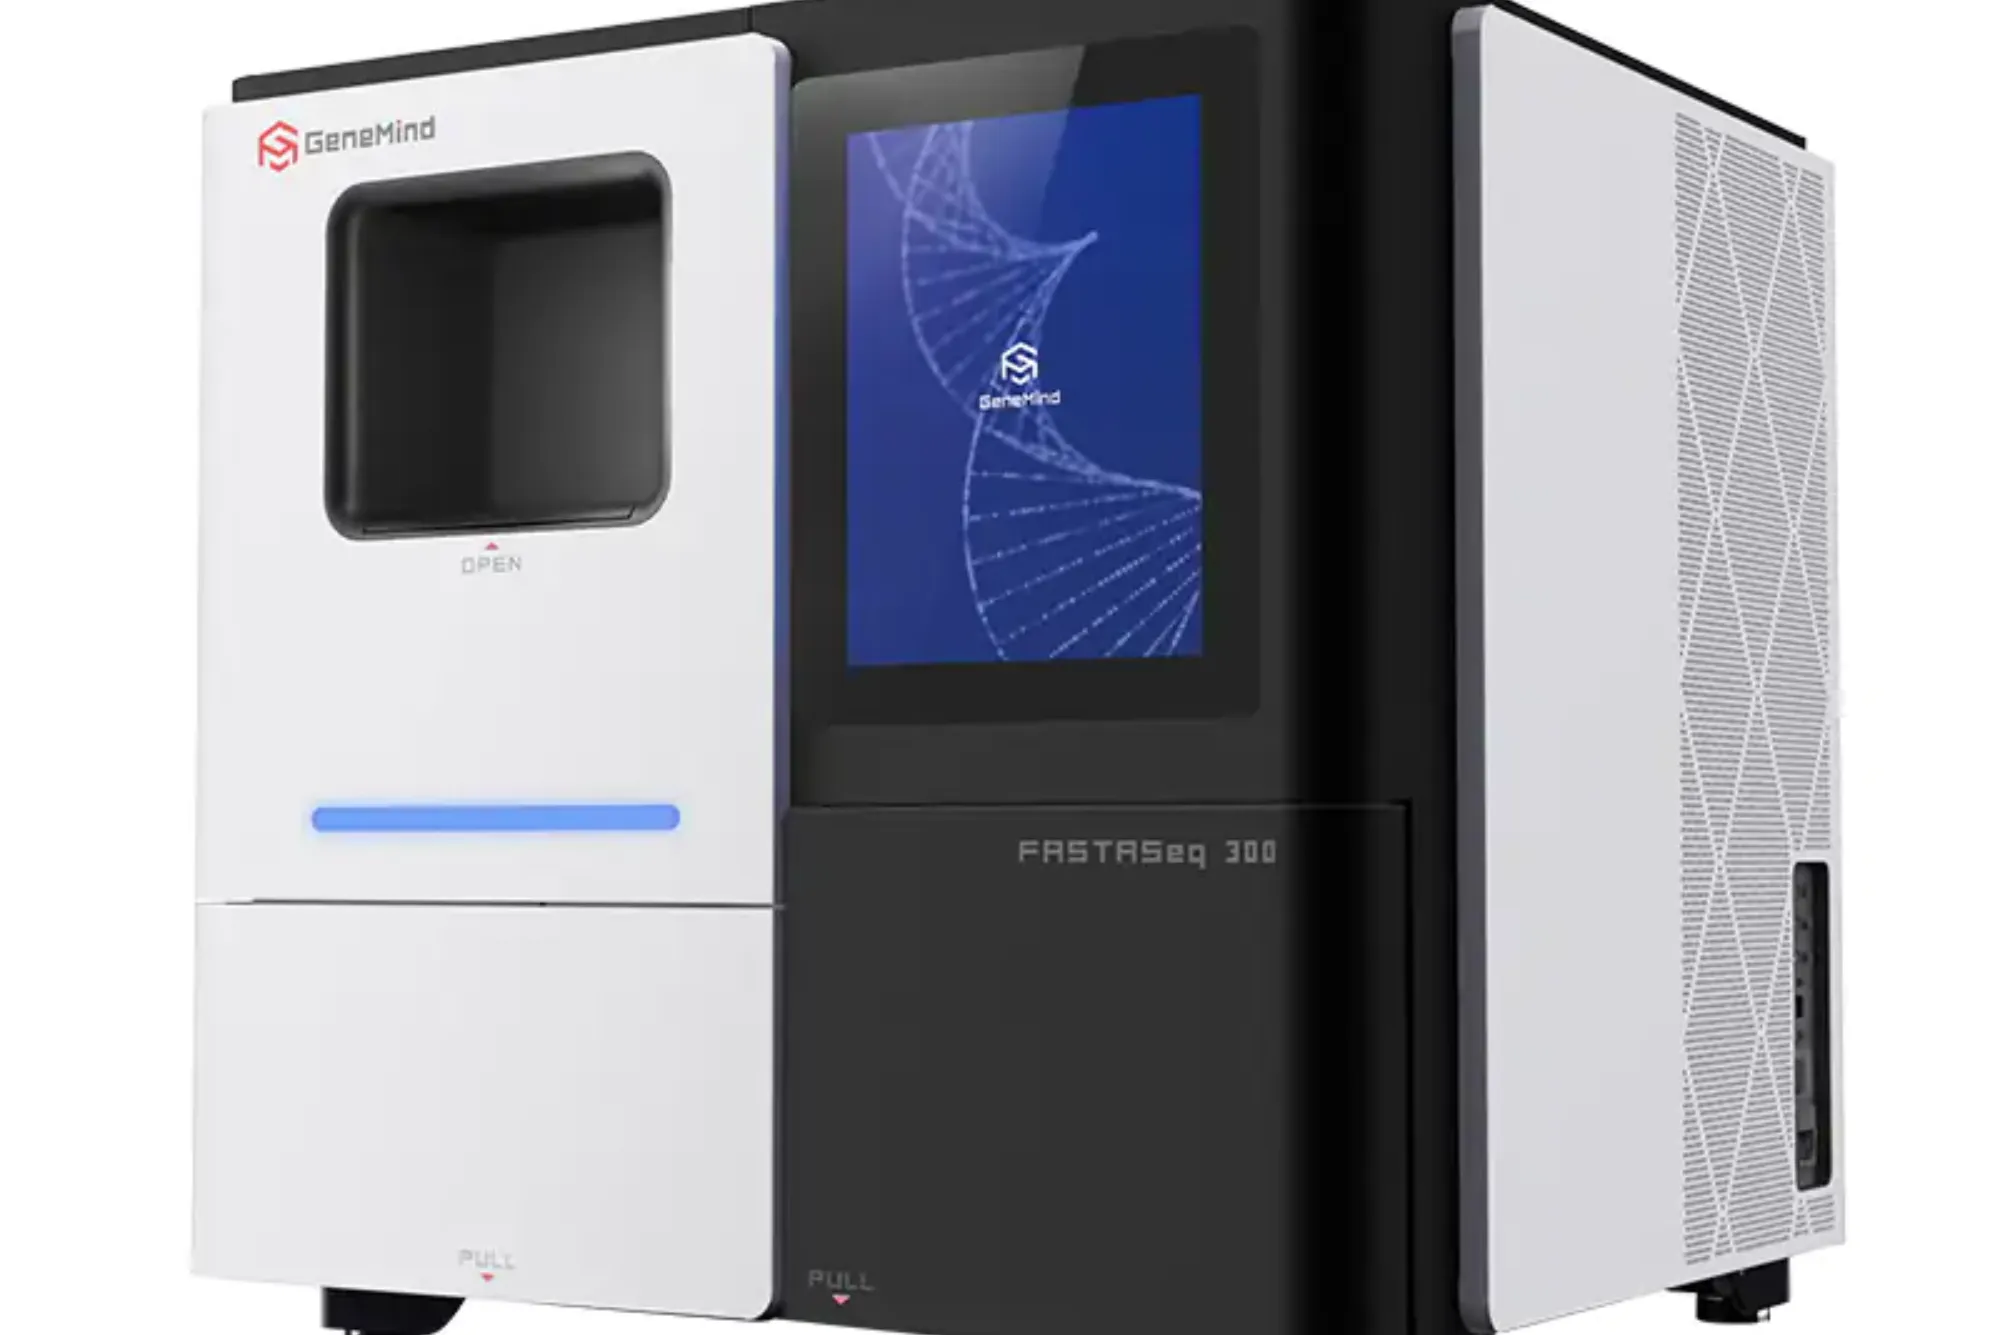 Advancing Genome Sequencing with GeneMind's FASTASeq 300 High-throughput Sequencing Platform